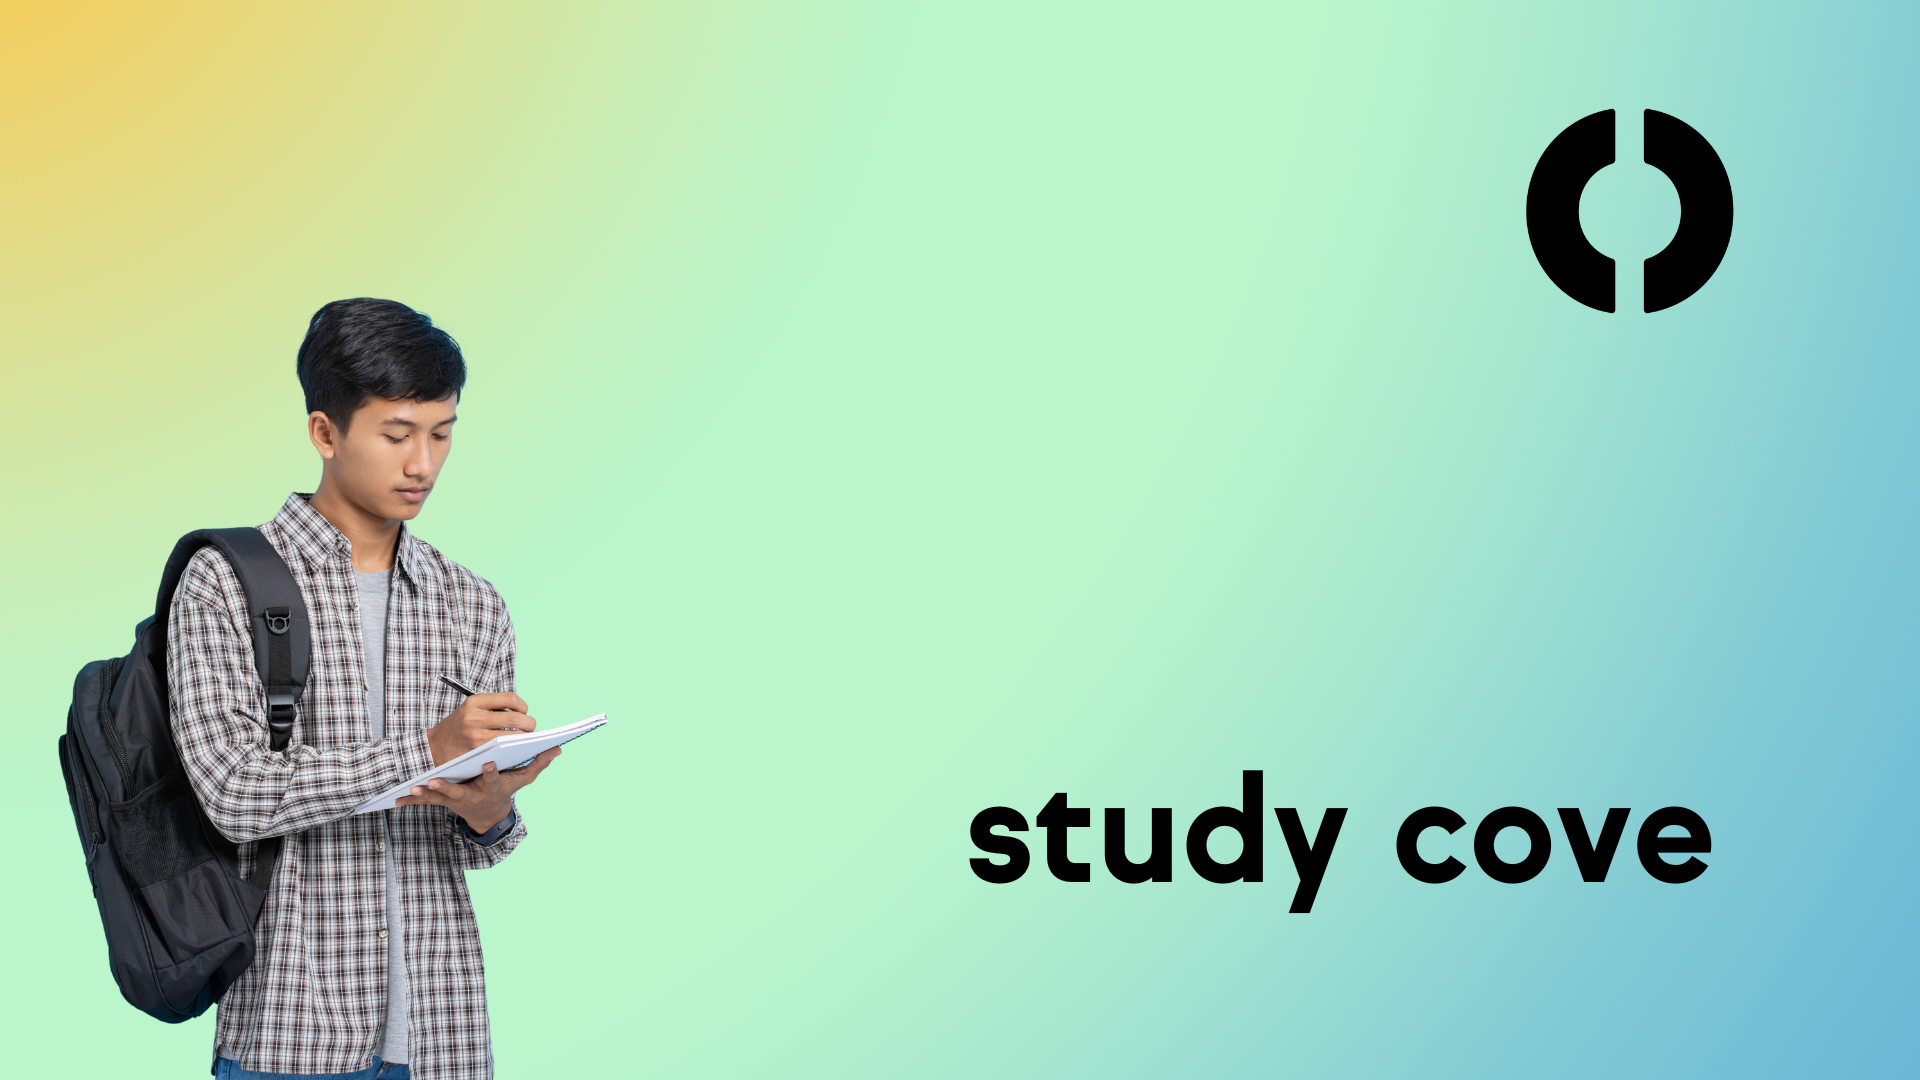 A young person with a flannel, backpack, and notebook taking careful notes standing up. The background image has a seafoam, blue, and orange gradient, with an allcove logo mark located on the top right corner, and text on the bottom right corner which reads "study cove."